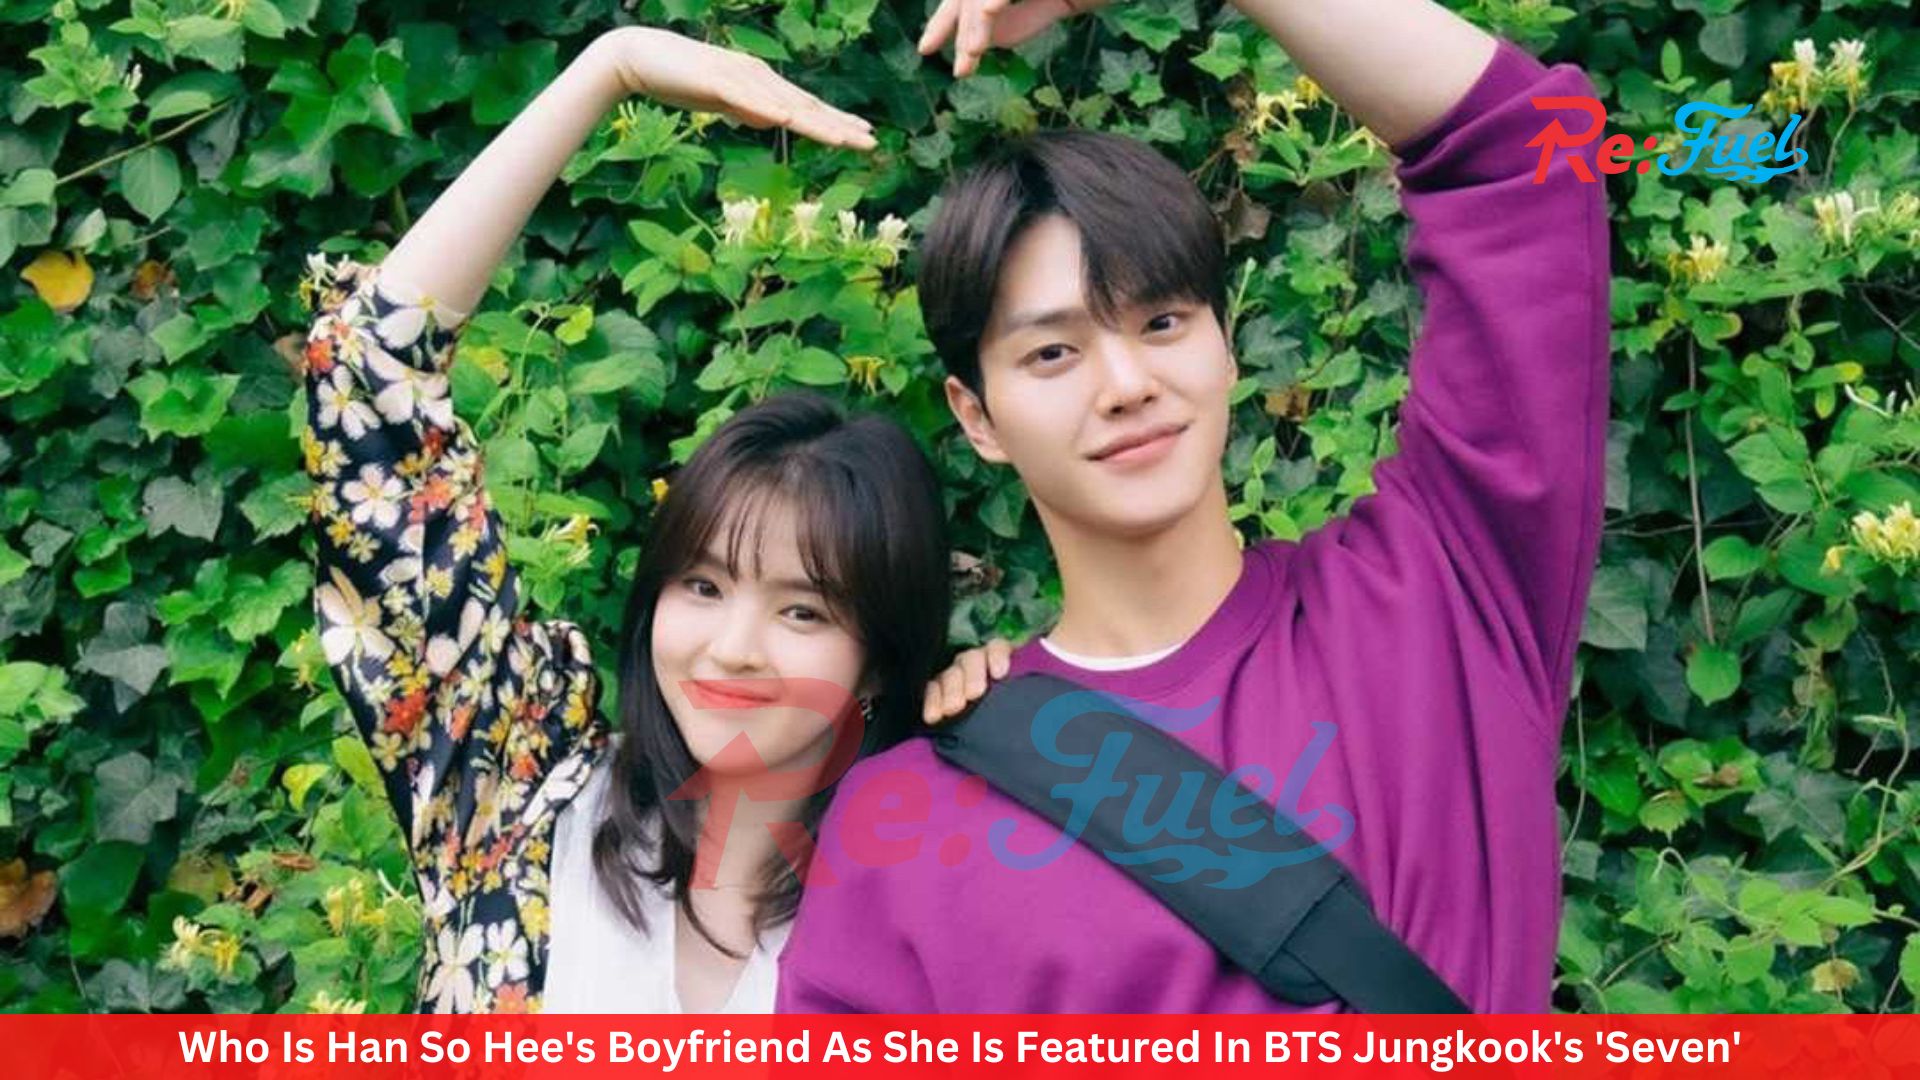 Who Is Han So Hee's Boyfriend As She Is Featured In BTS Jungkook's 'Seven'